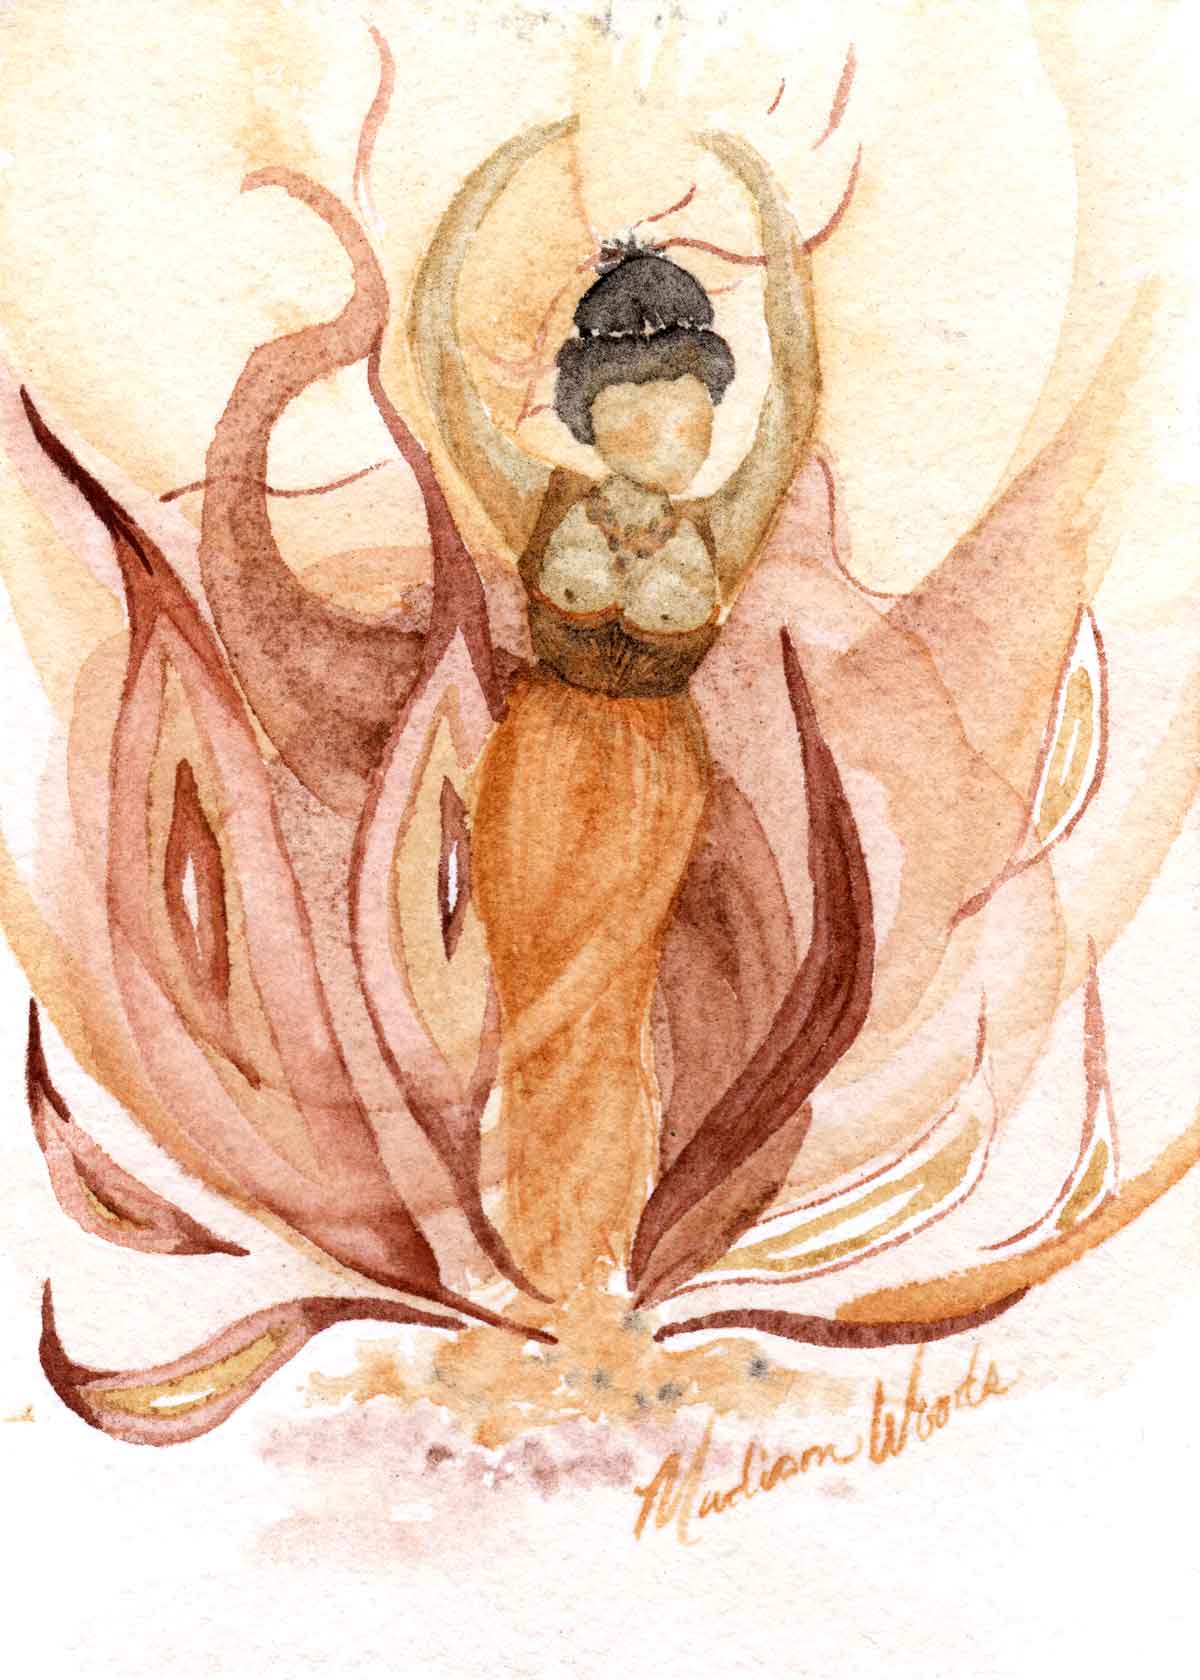 Painting of a goddess figurine dancing in the flames.